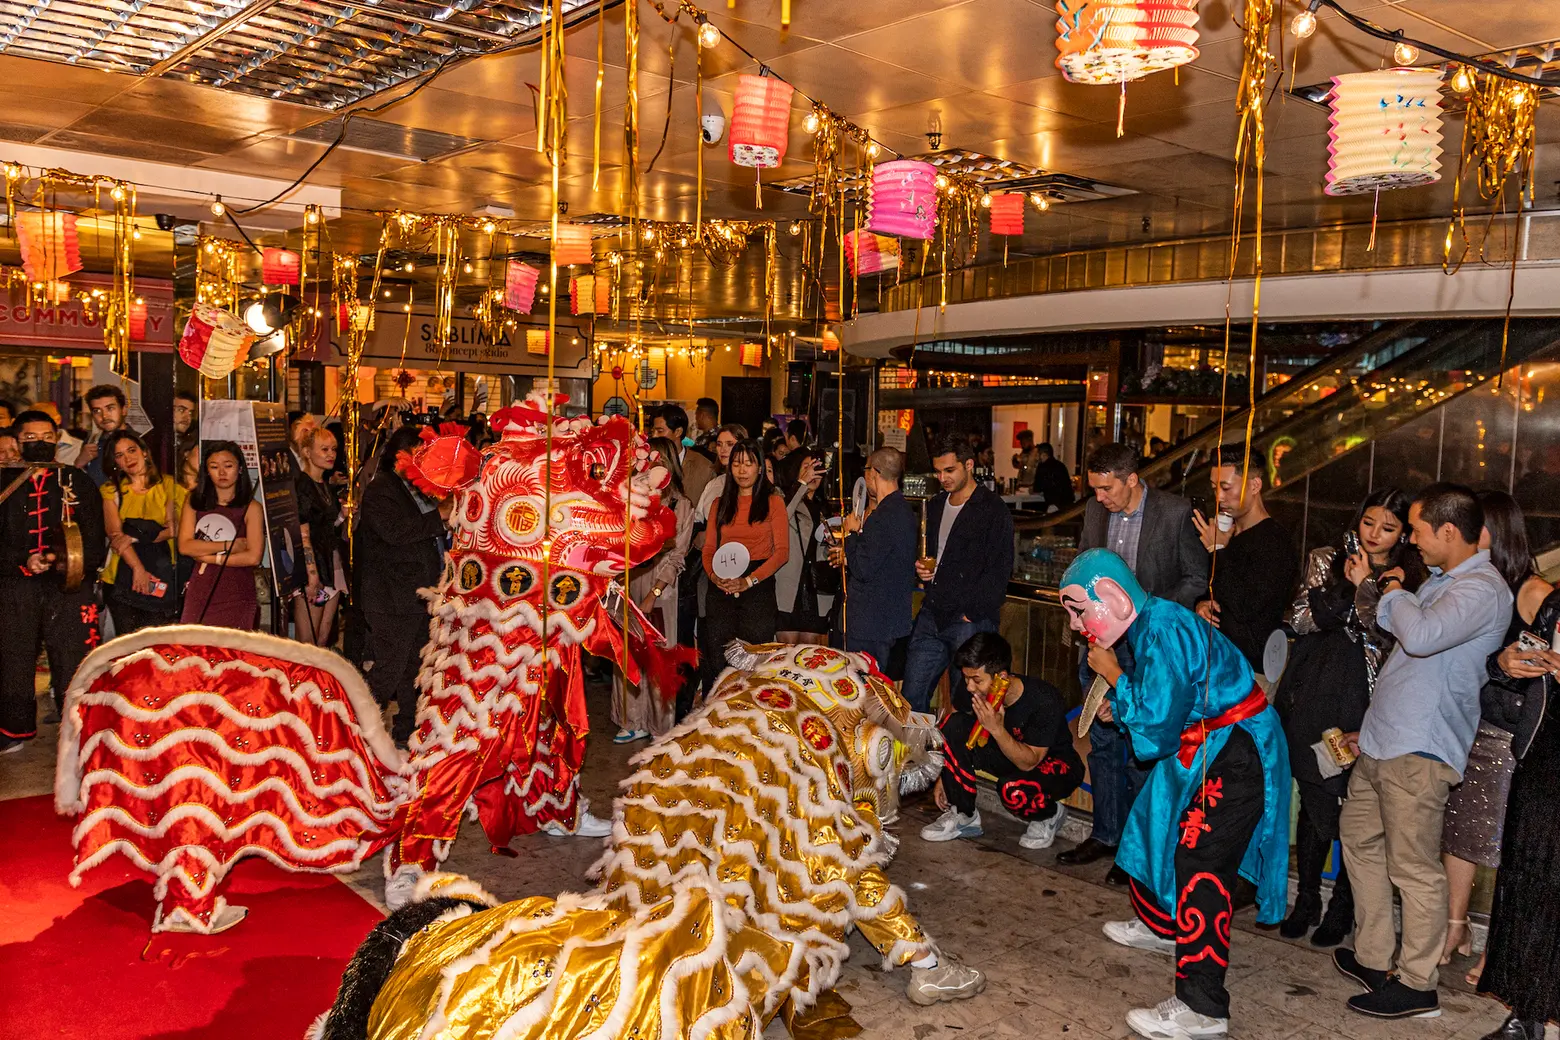 Lunar New Year brings celebrations and joy to NYC’s Chinatown